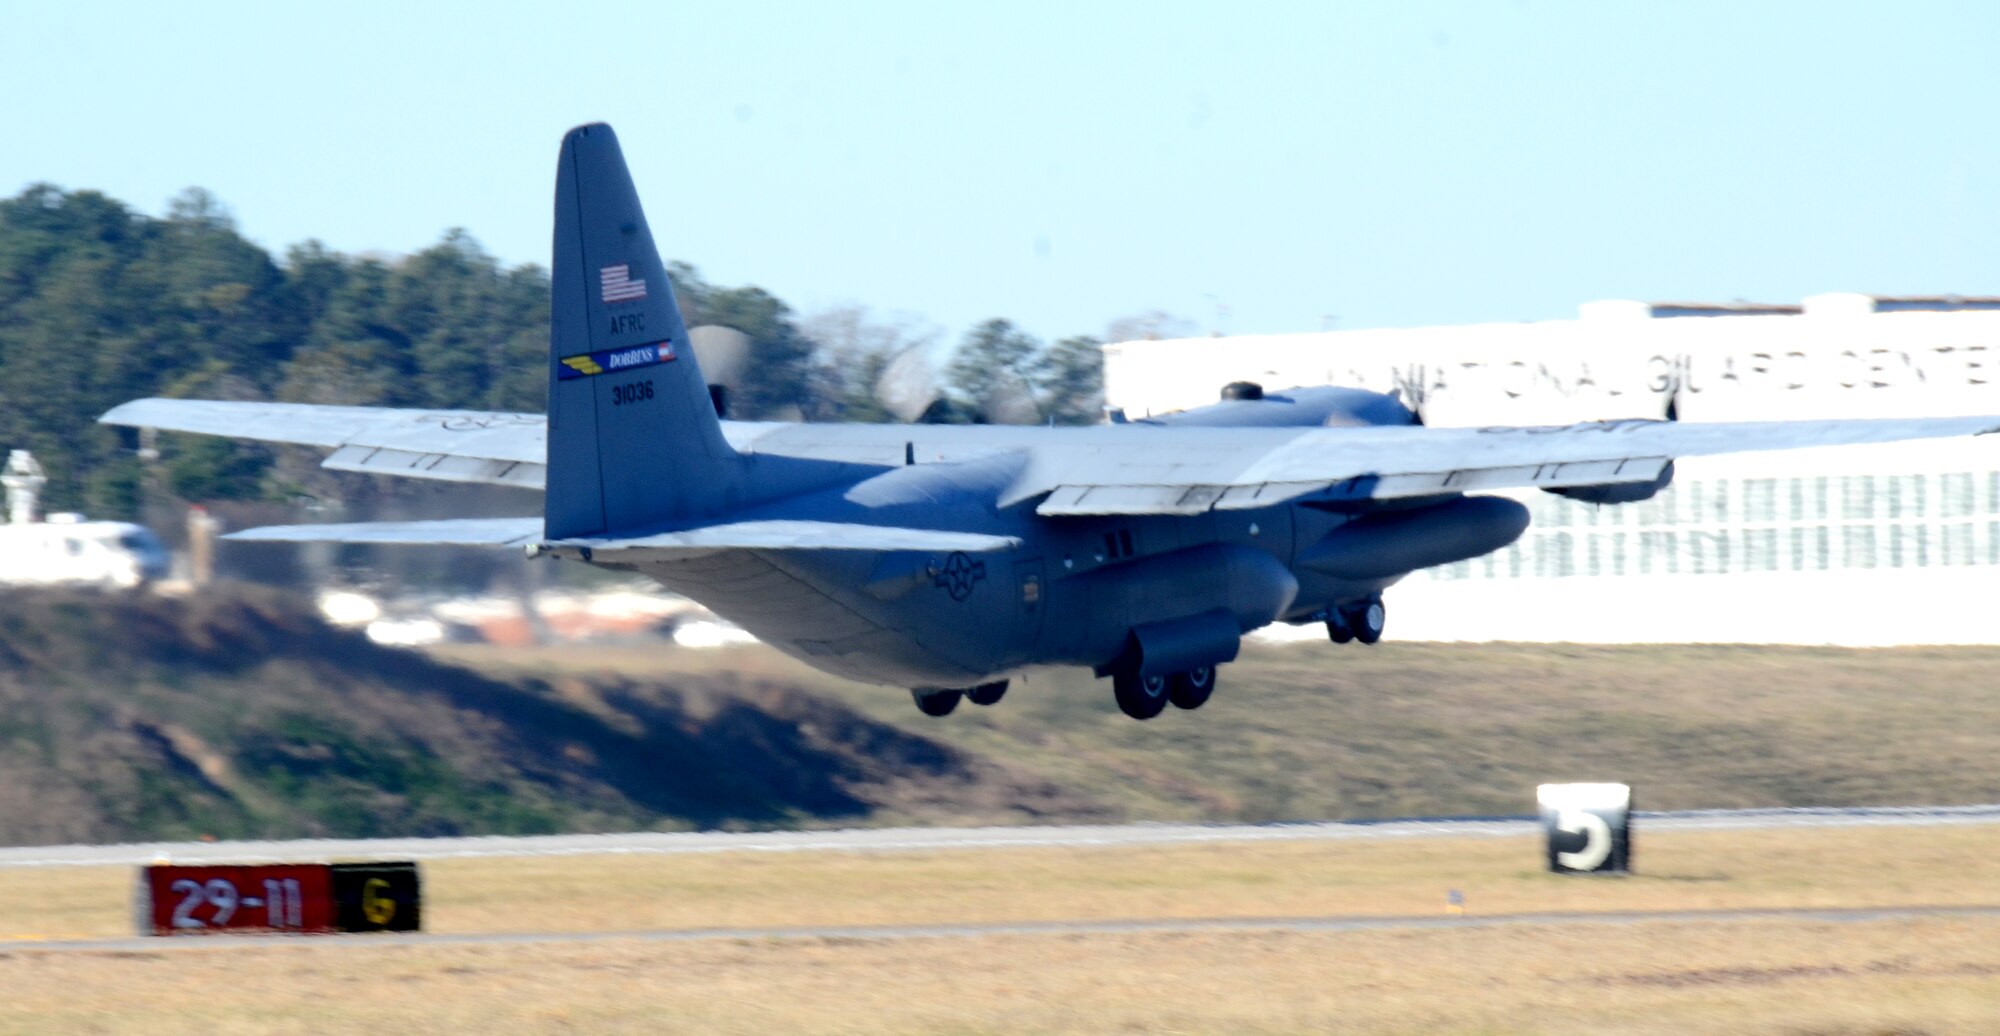 A U.S. Air Force C-130 Hercules takes off from Dobbins Air Reserve Base, Ga. for a deployment Jan. 8, 2015. More than 150 members from the 94th Airlift Wing deployed to support the Central Command Area of Responsibility. (U.S. Air Force photo/Brad Fallin)